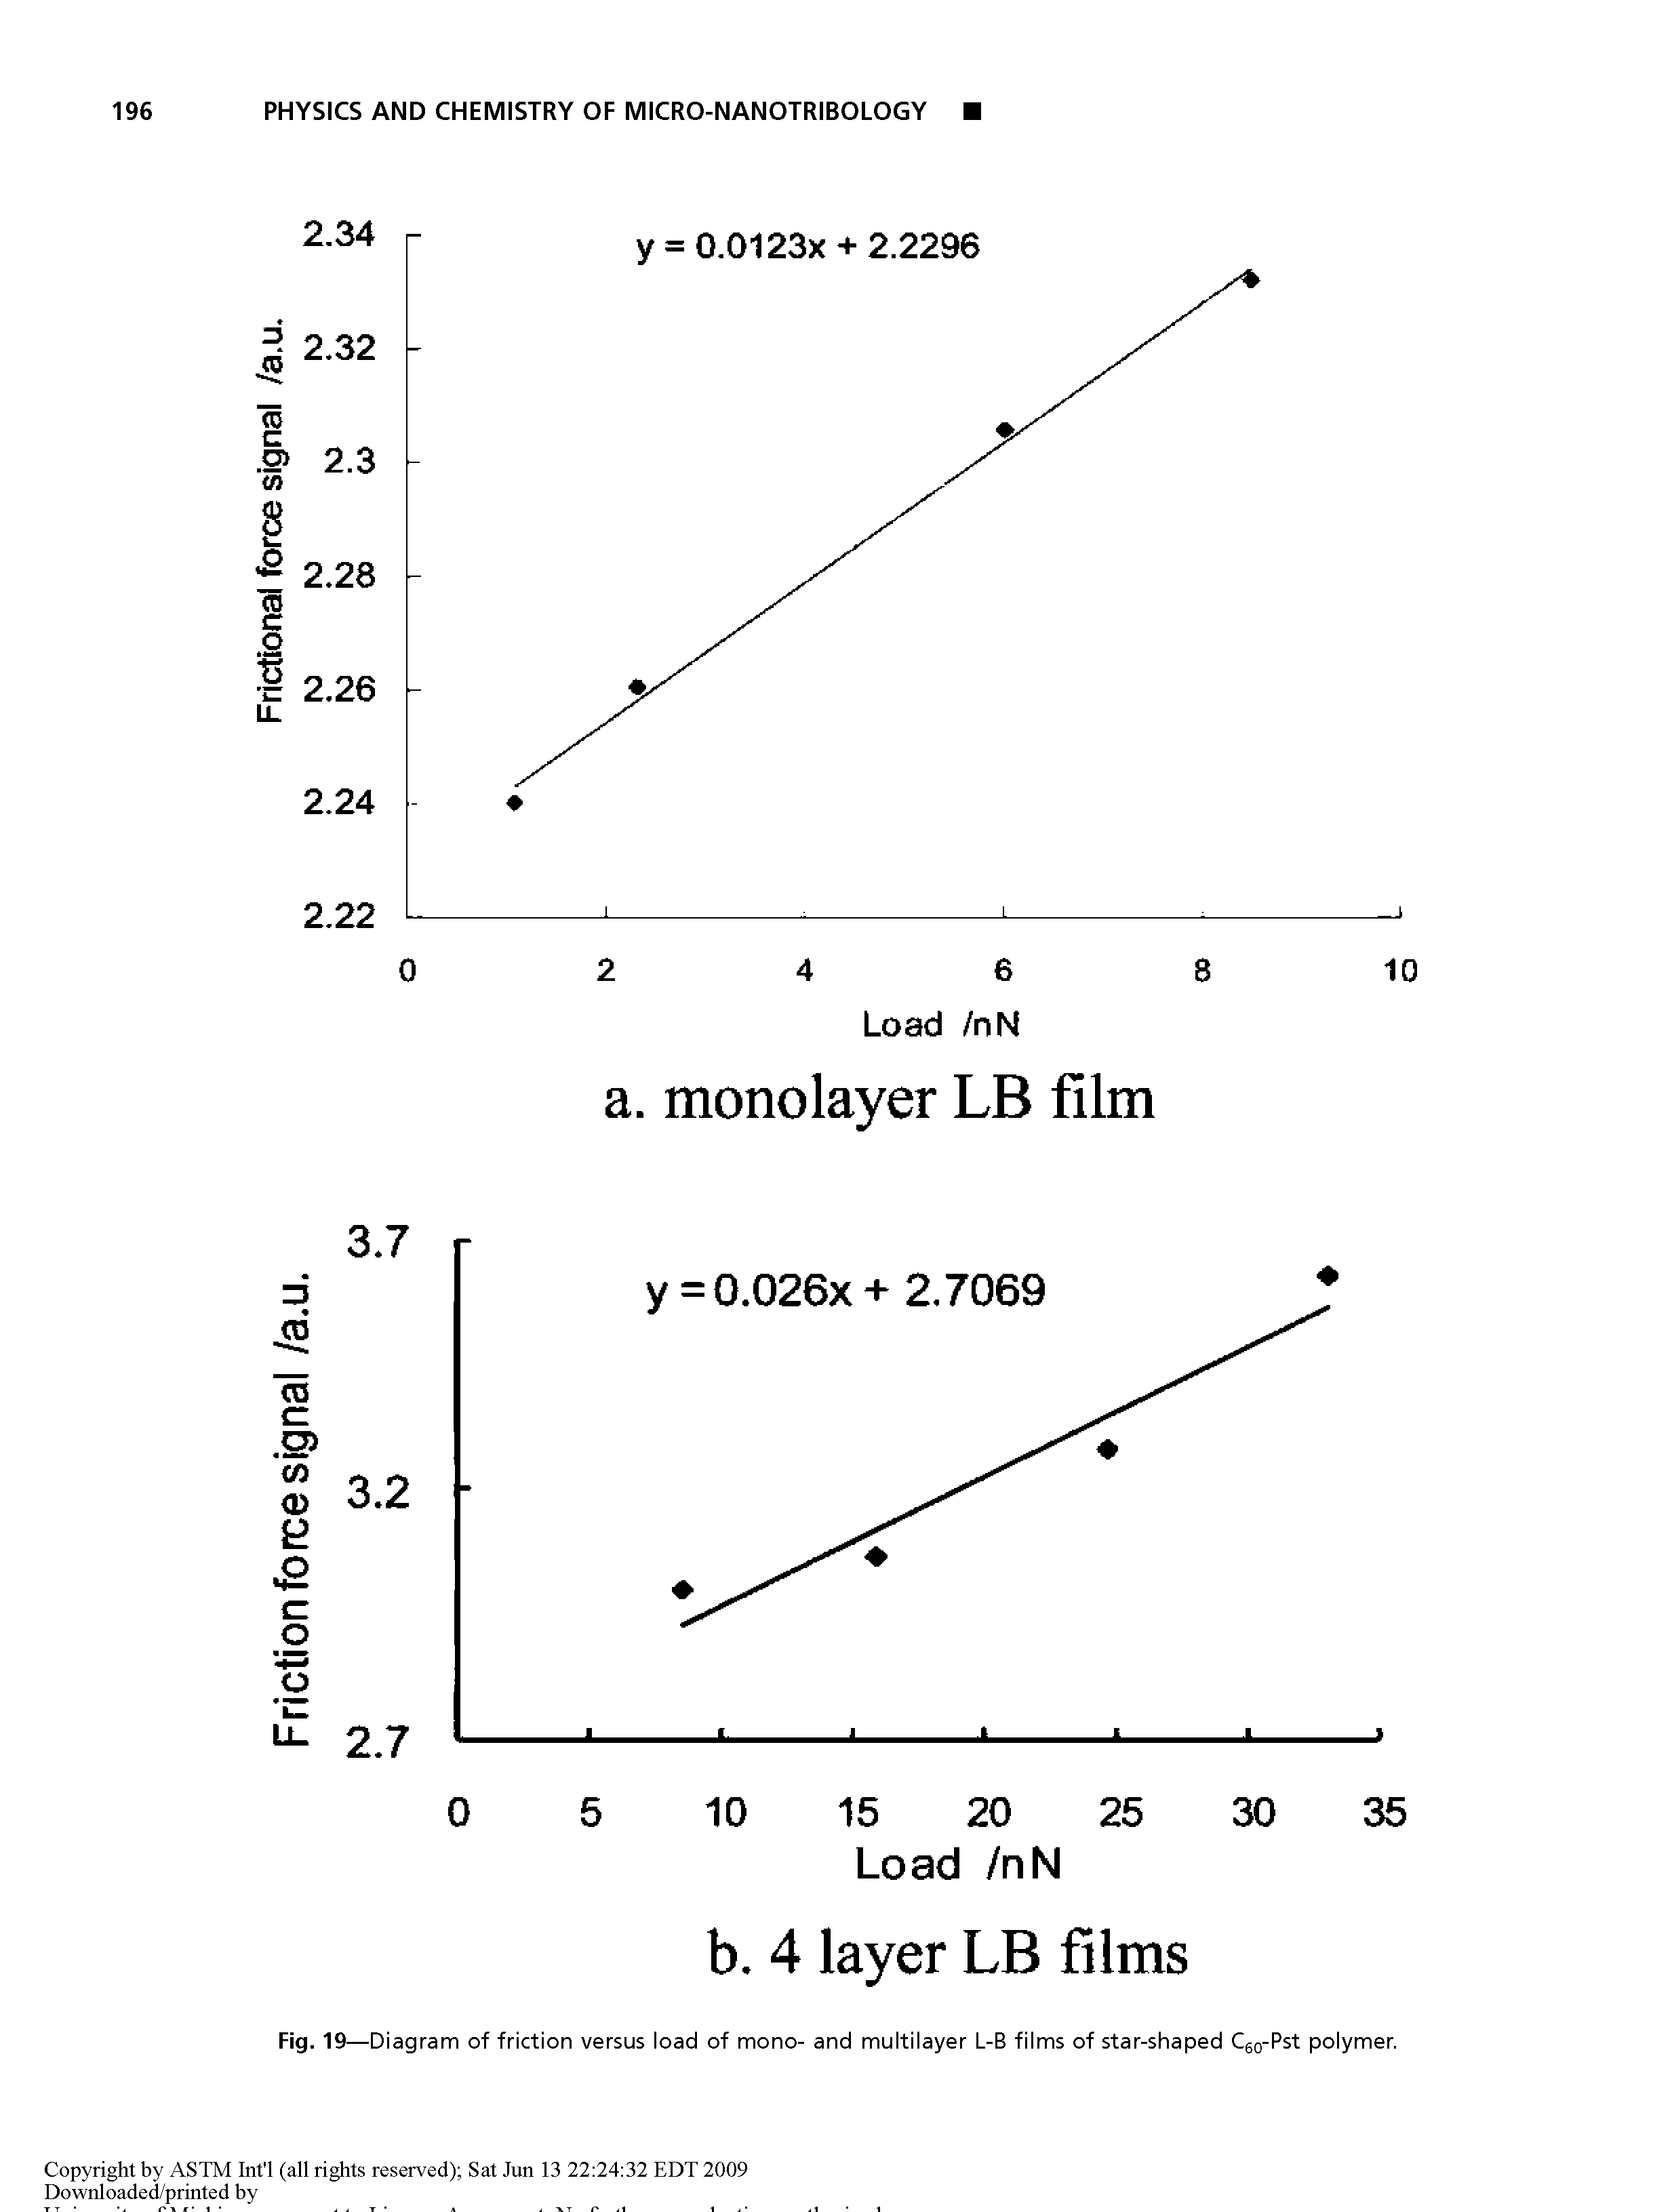 Fig. 19—Diagram of friction versus load of mono- and multilayer L-B films of star-shaped Cgo-Pst polymer.